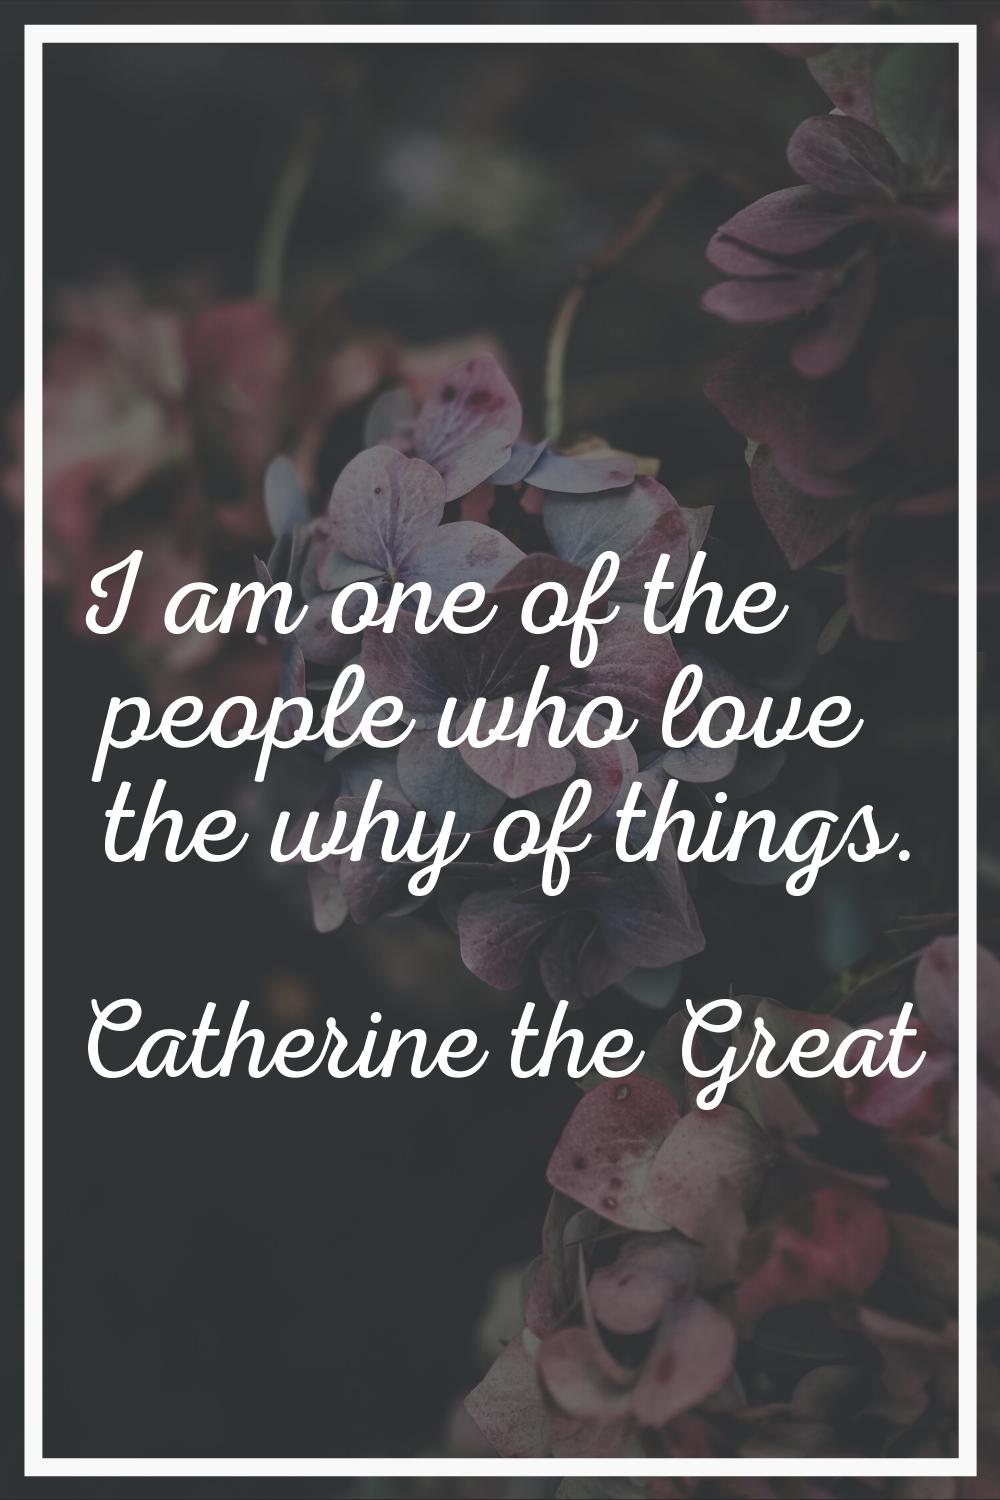 I am one of the people who love the why of things.